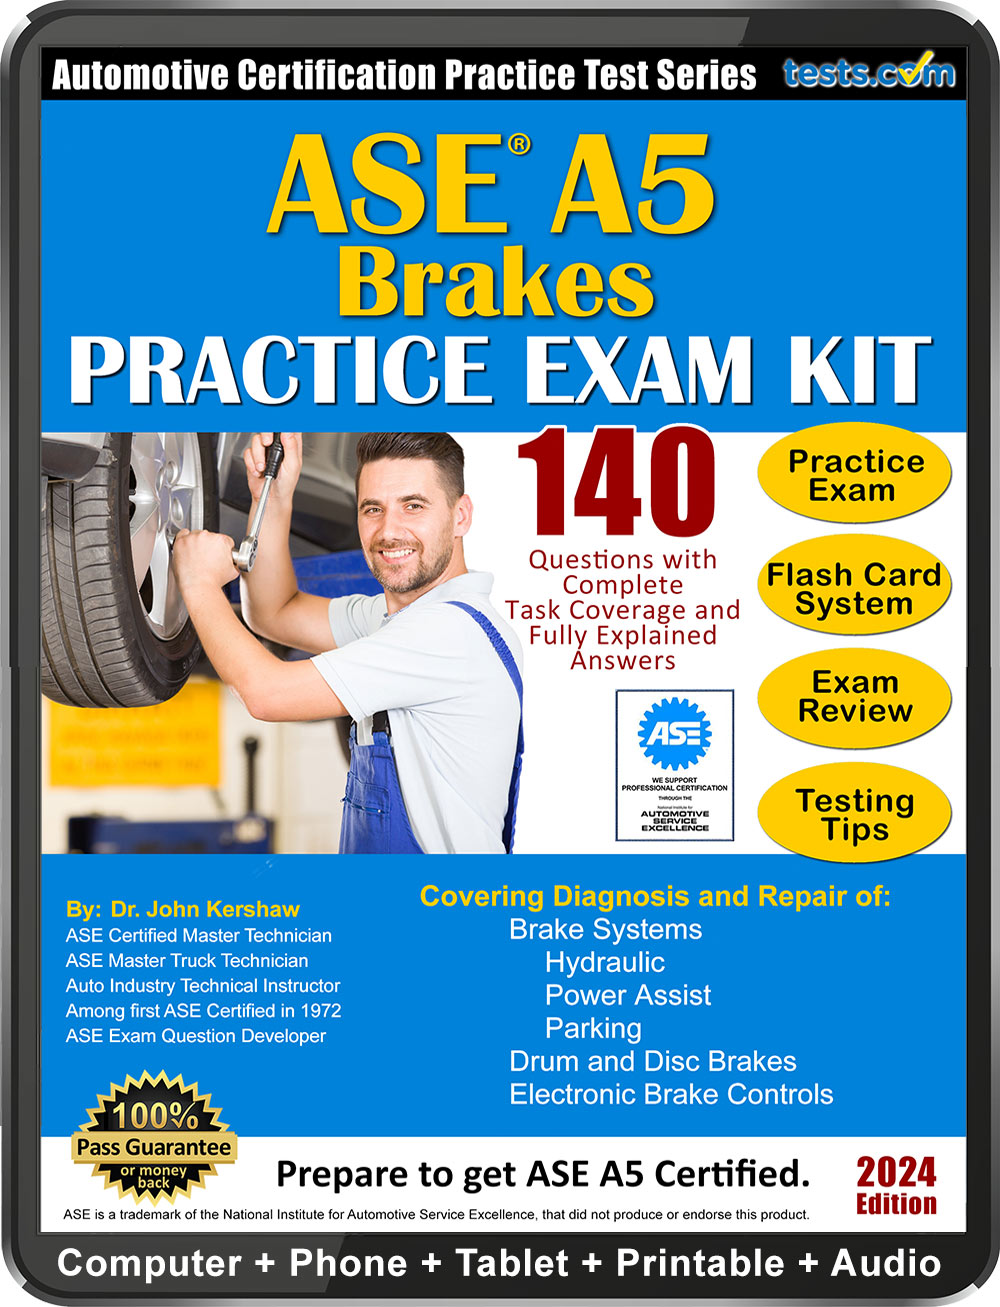 ASE A5 Practice Test